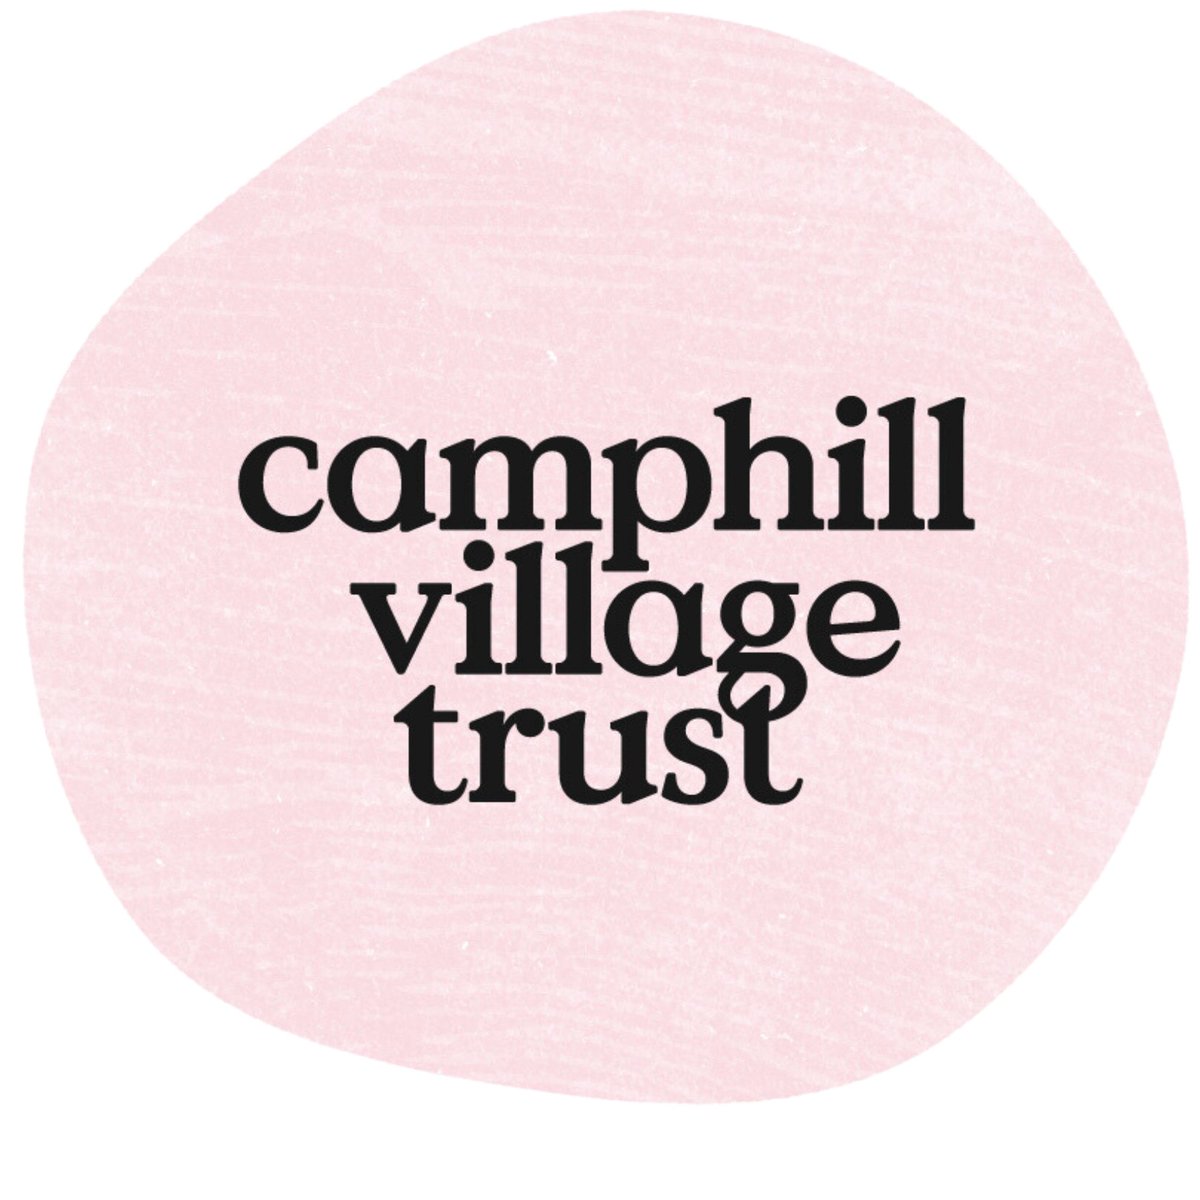 We are looking for an exceptional Estate Director who will play a key role in driving the Trust’s future strategy and our audacious transformational vision. Join @CamphillVillag1 at an exciting time. @Sara_Thakkar
ow.ly/pbm250Olkiy